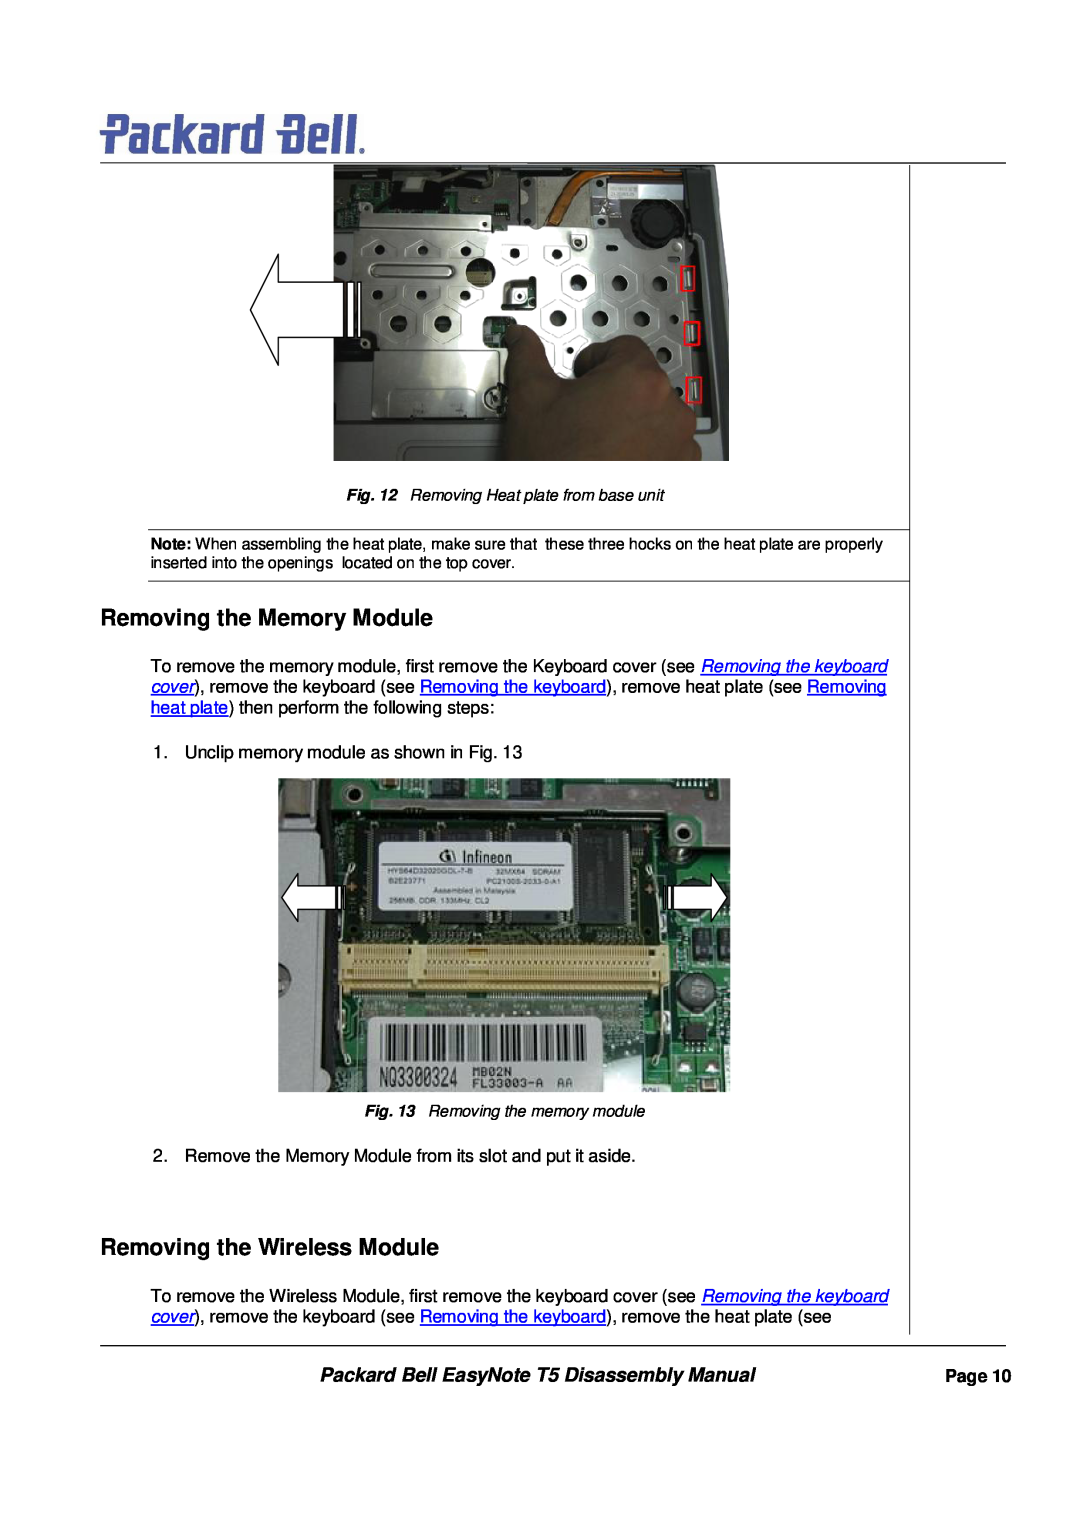 Packard Bell Removing the Memory Module, Removing the Wireless Module, Packard Bell EasyNote T5 Disassembly Manual 